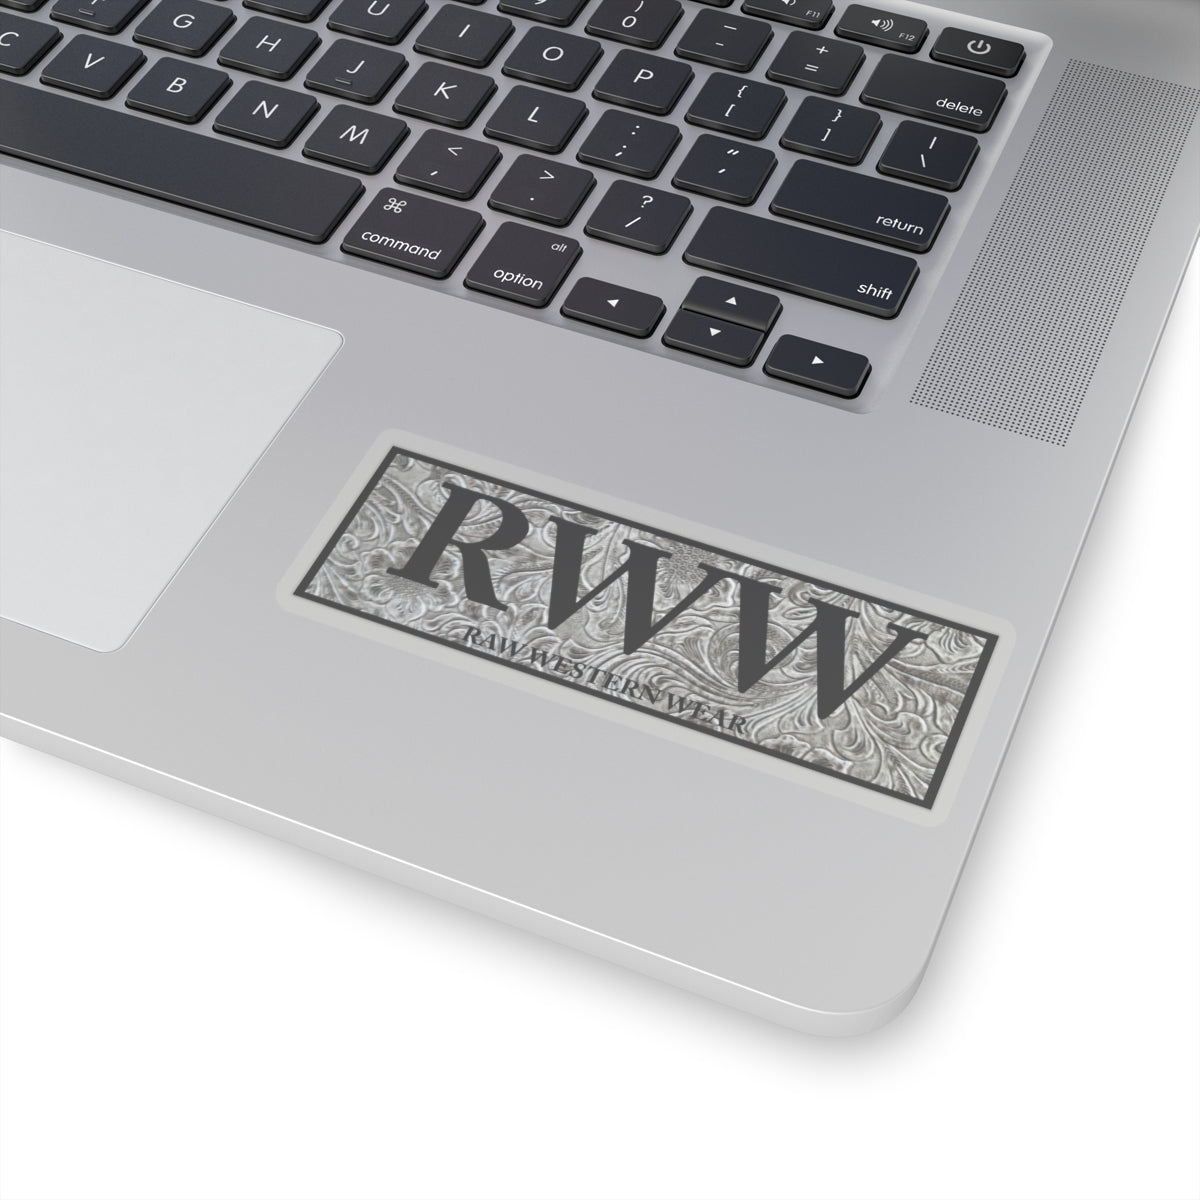 Raw Western Wear Black and White Tooled Leather Sticker